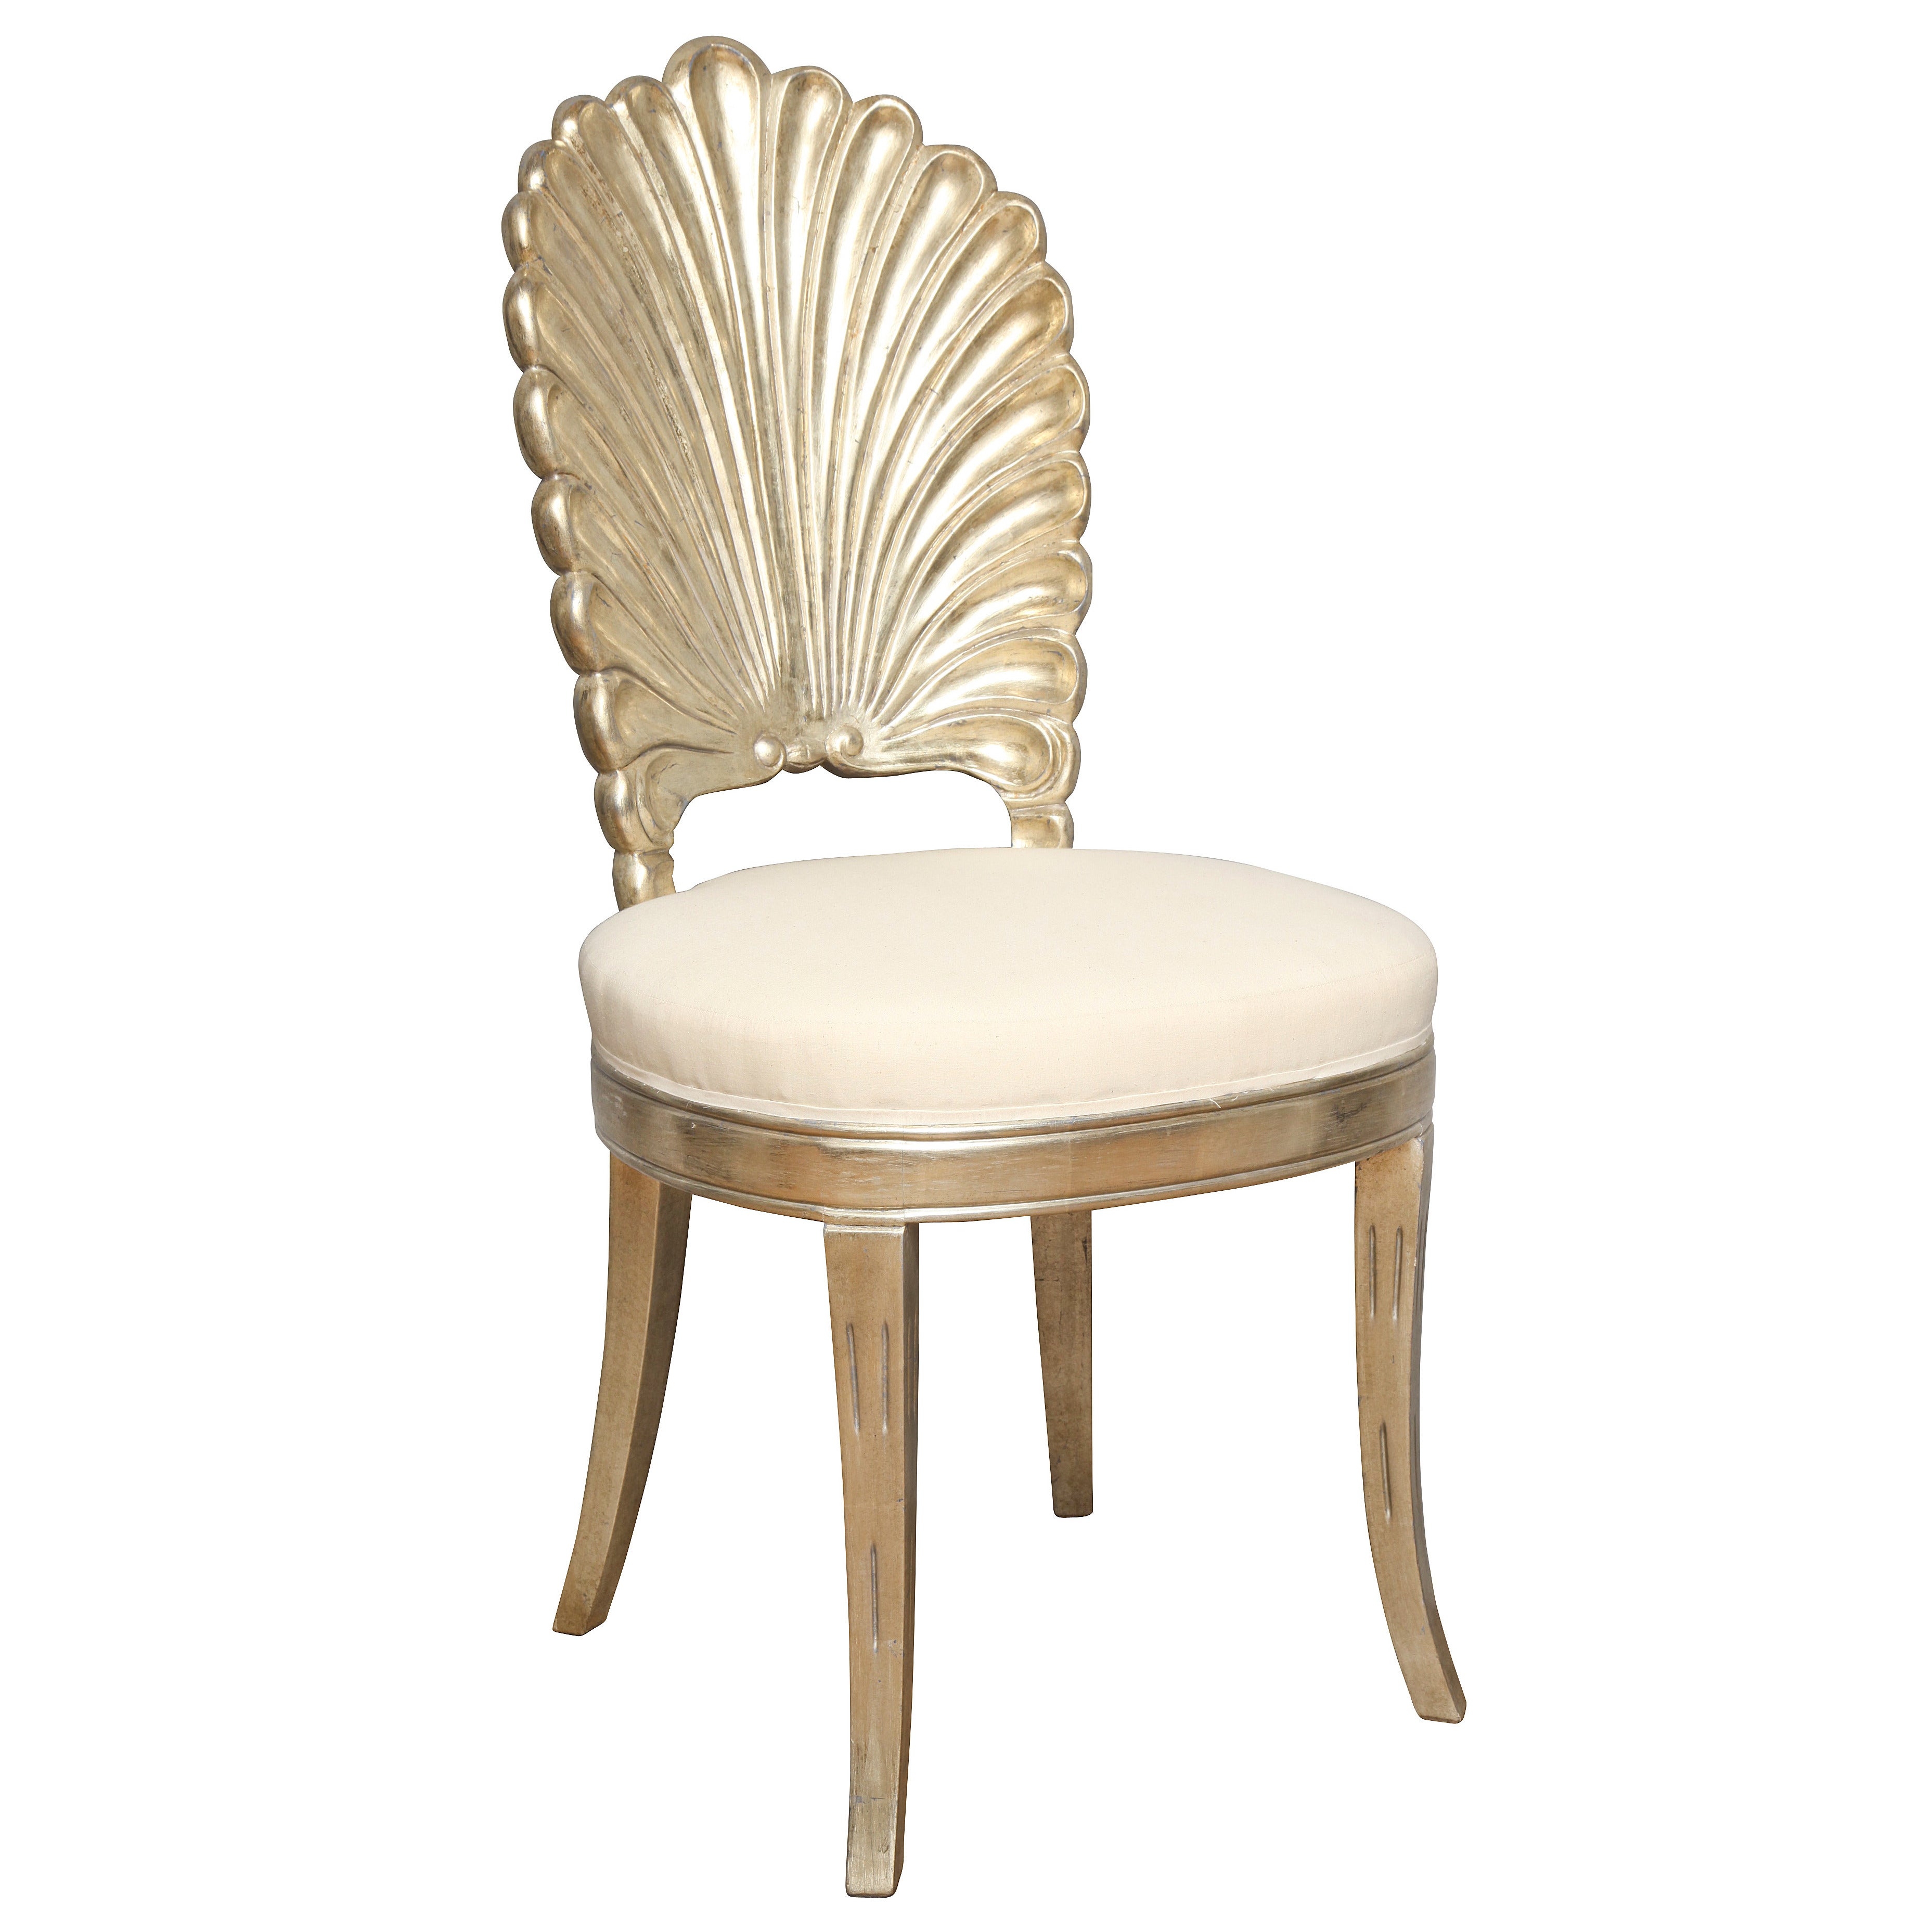 An Italian Shell Back Carved and Silver Leafed Chair